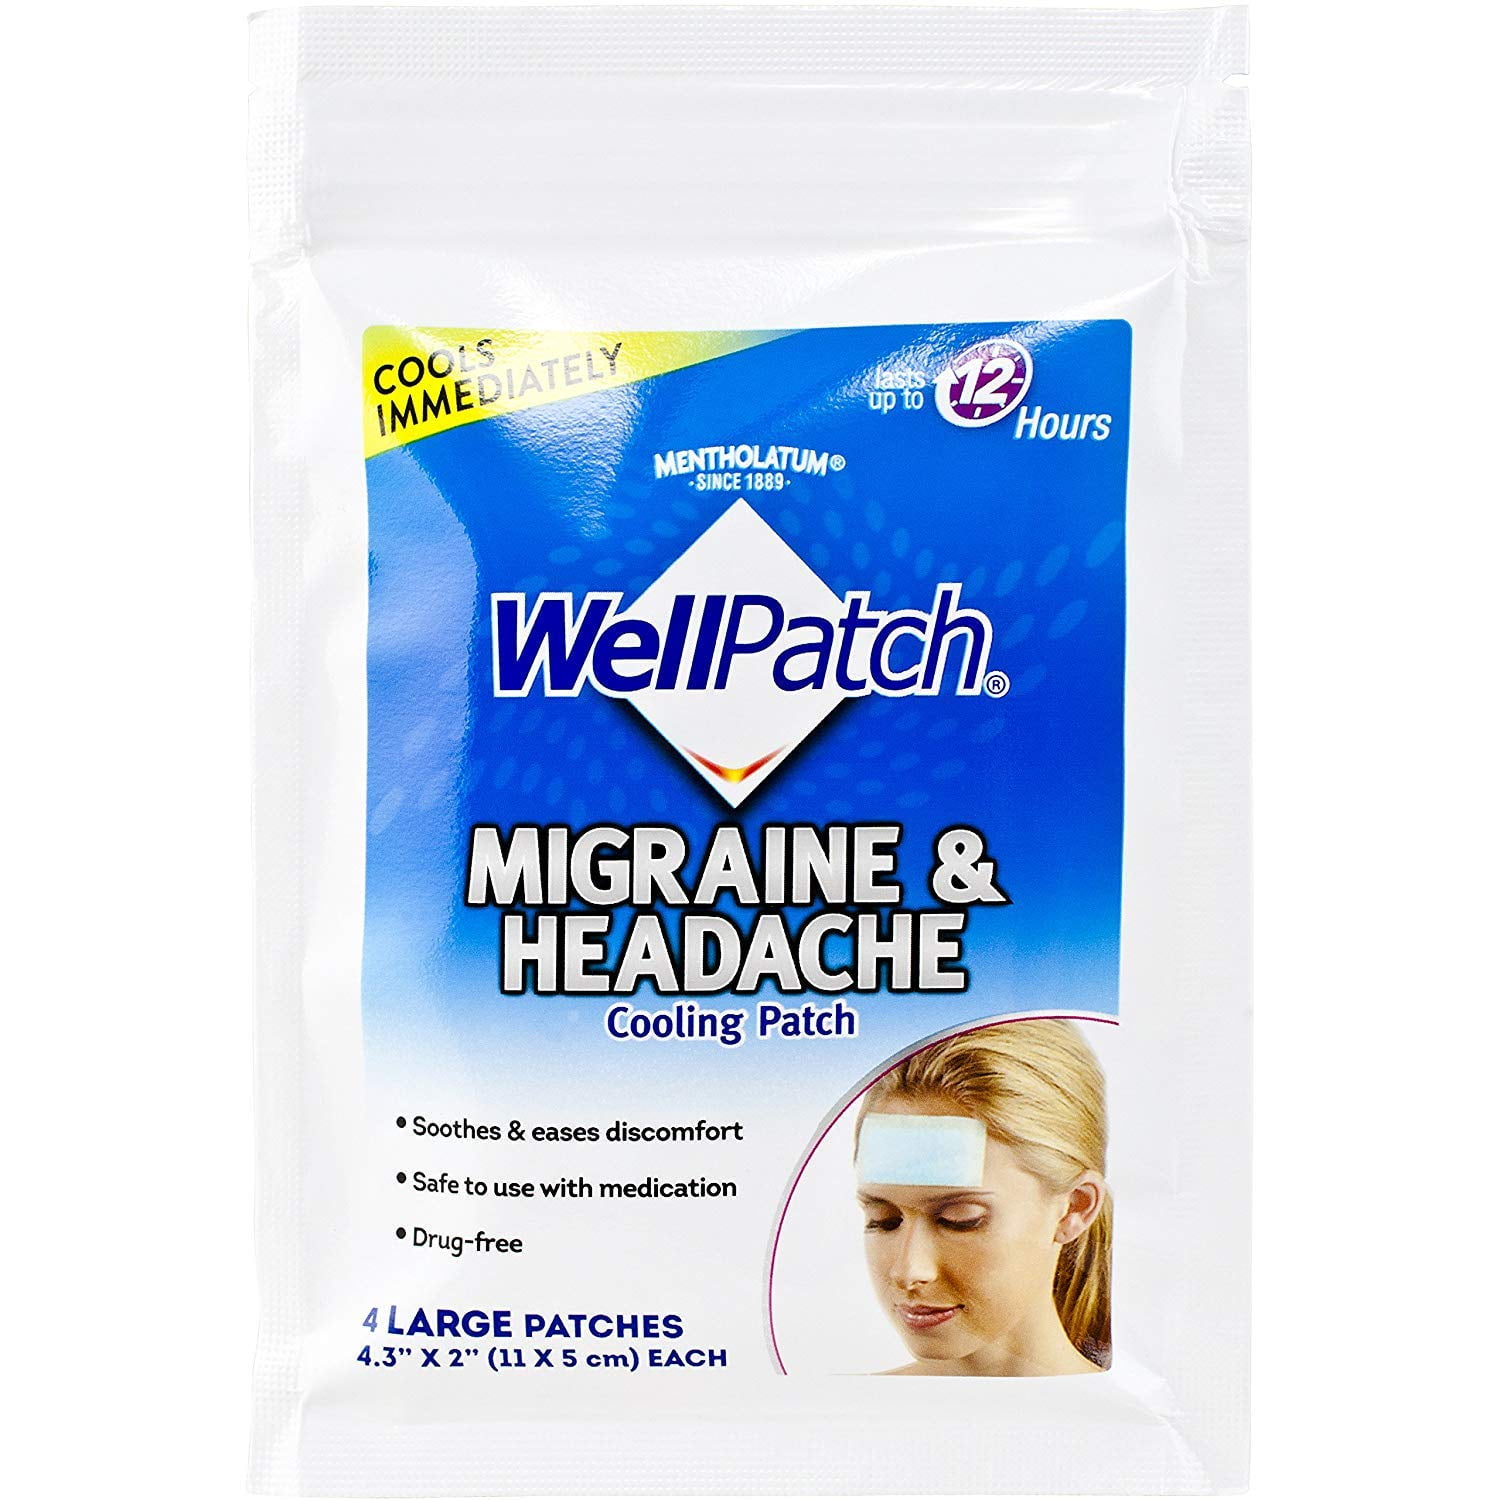 WellPatch Migraine & Headache Cooling Patch - Drug Free Lasts Up to 12  Hours Safe to Use with Medication - Large Patches (4 Packs of 4 Patches)  Each 4.3 x 2 in